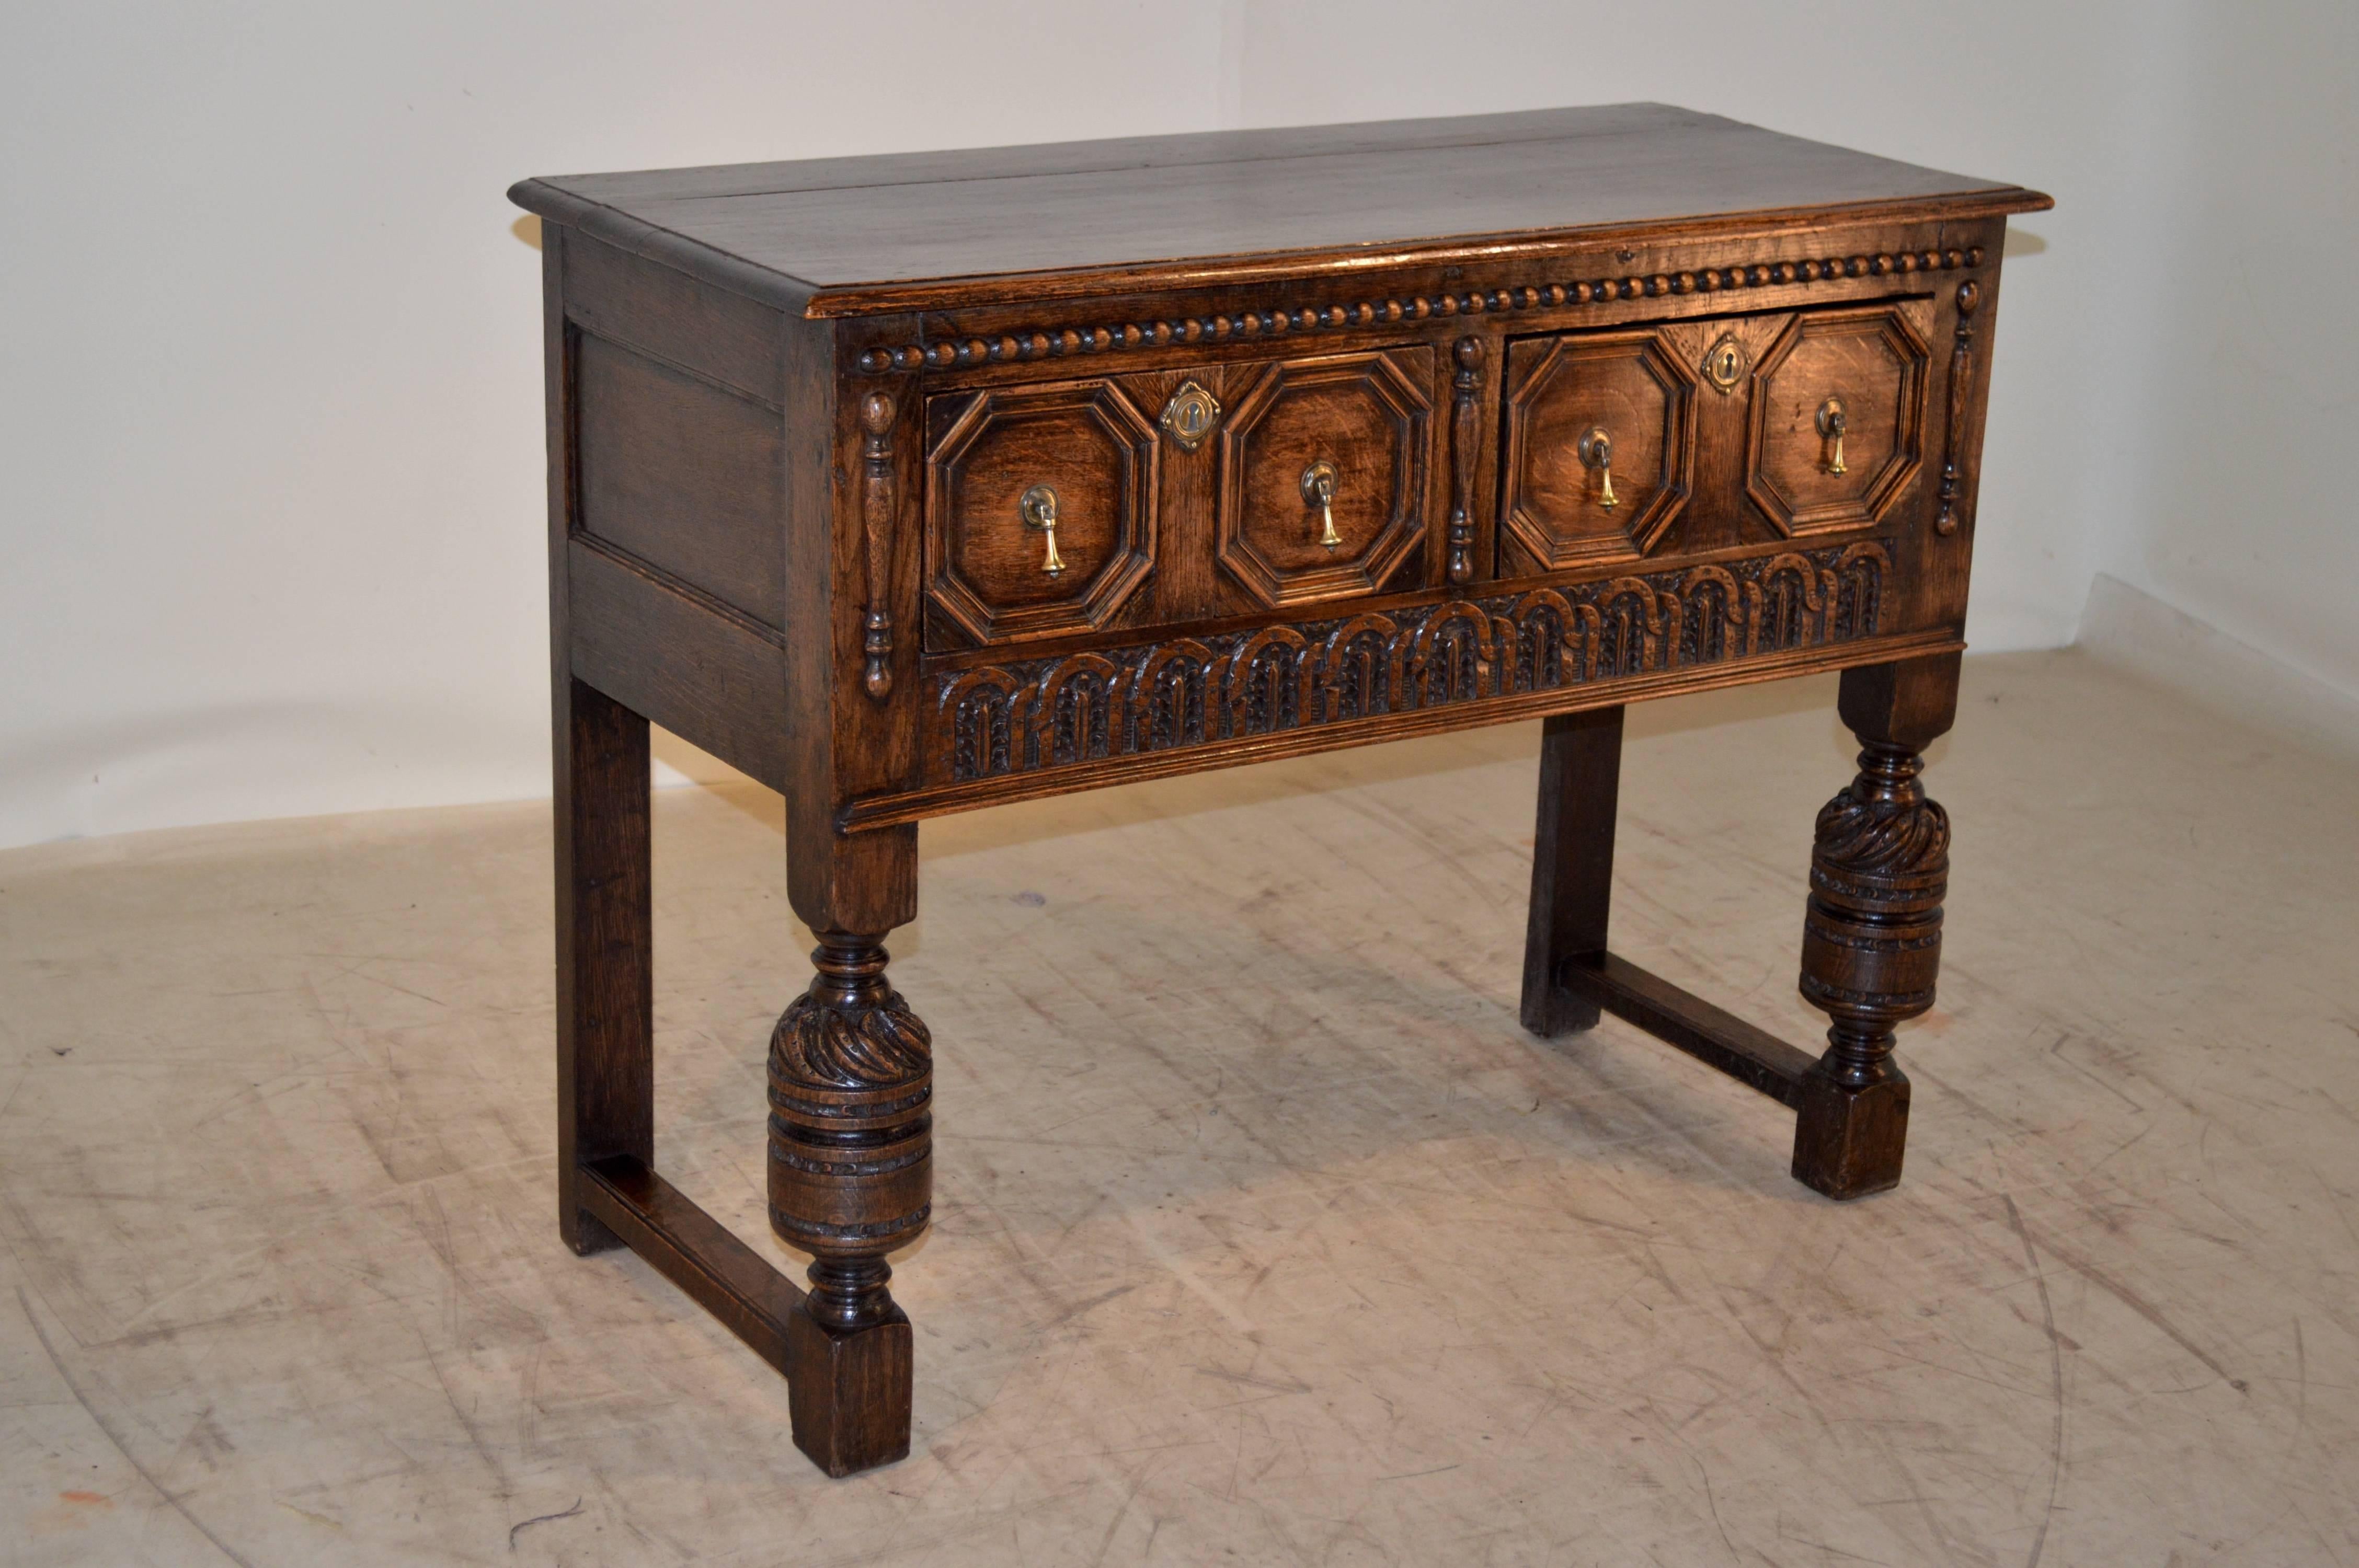 19th century English oak small server with a beveled edge around the top following down to paneled sides and two drawers on the front of the piece which have geometric raised panels. They are flanked with applied turnings, beaded molding, and a